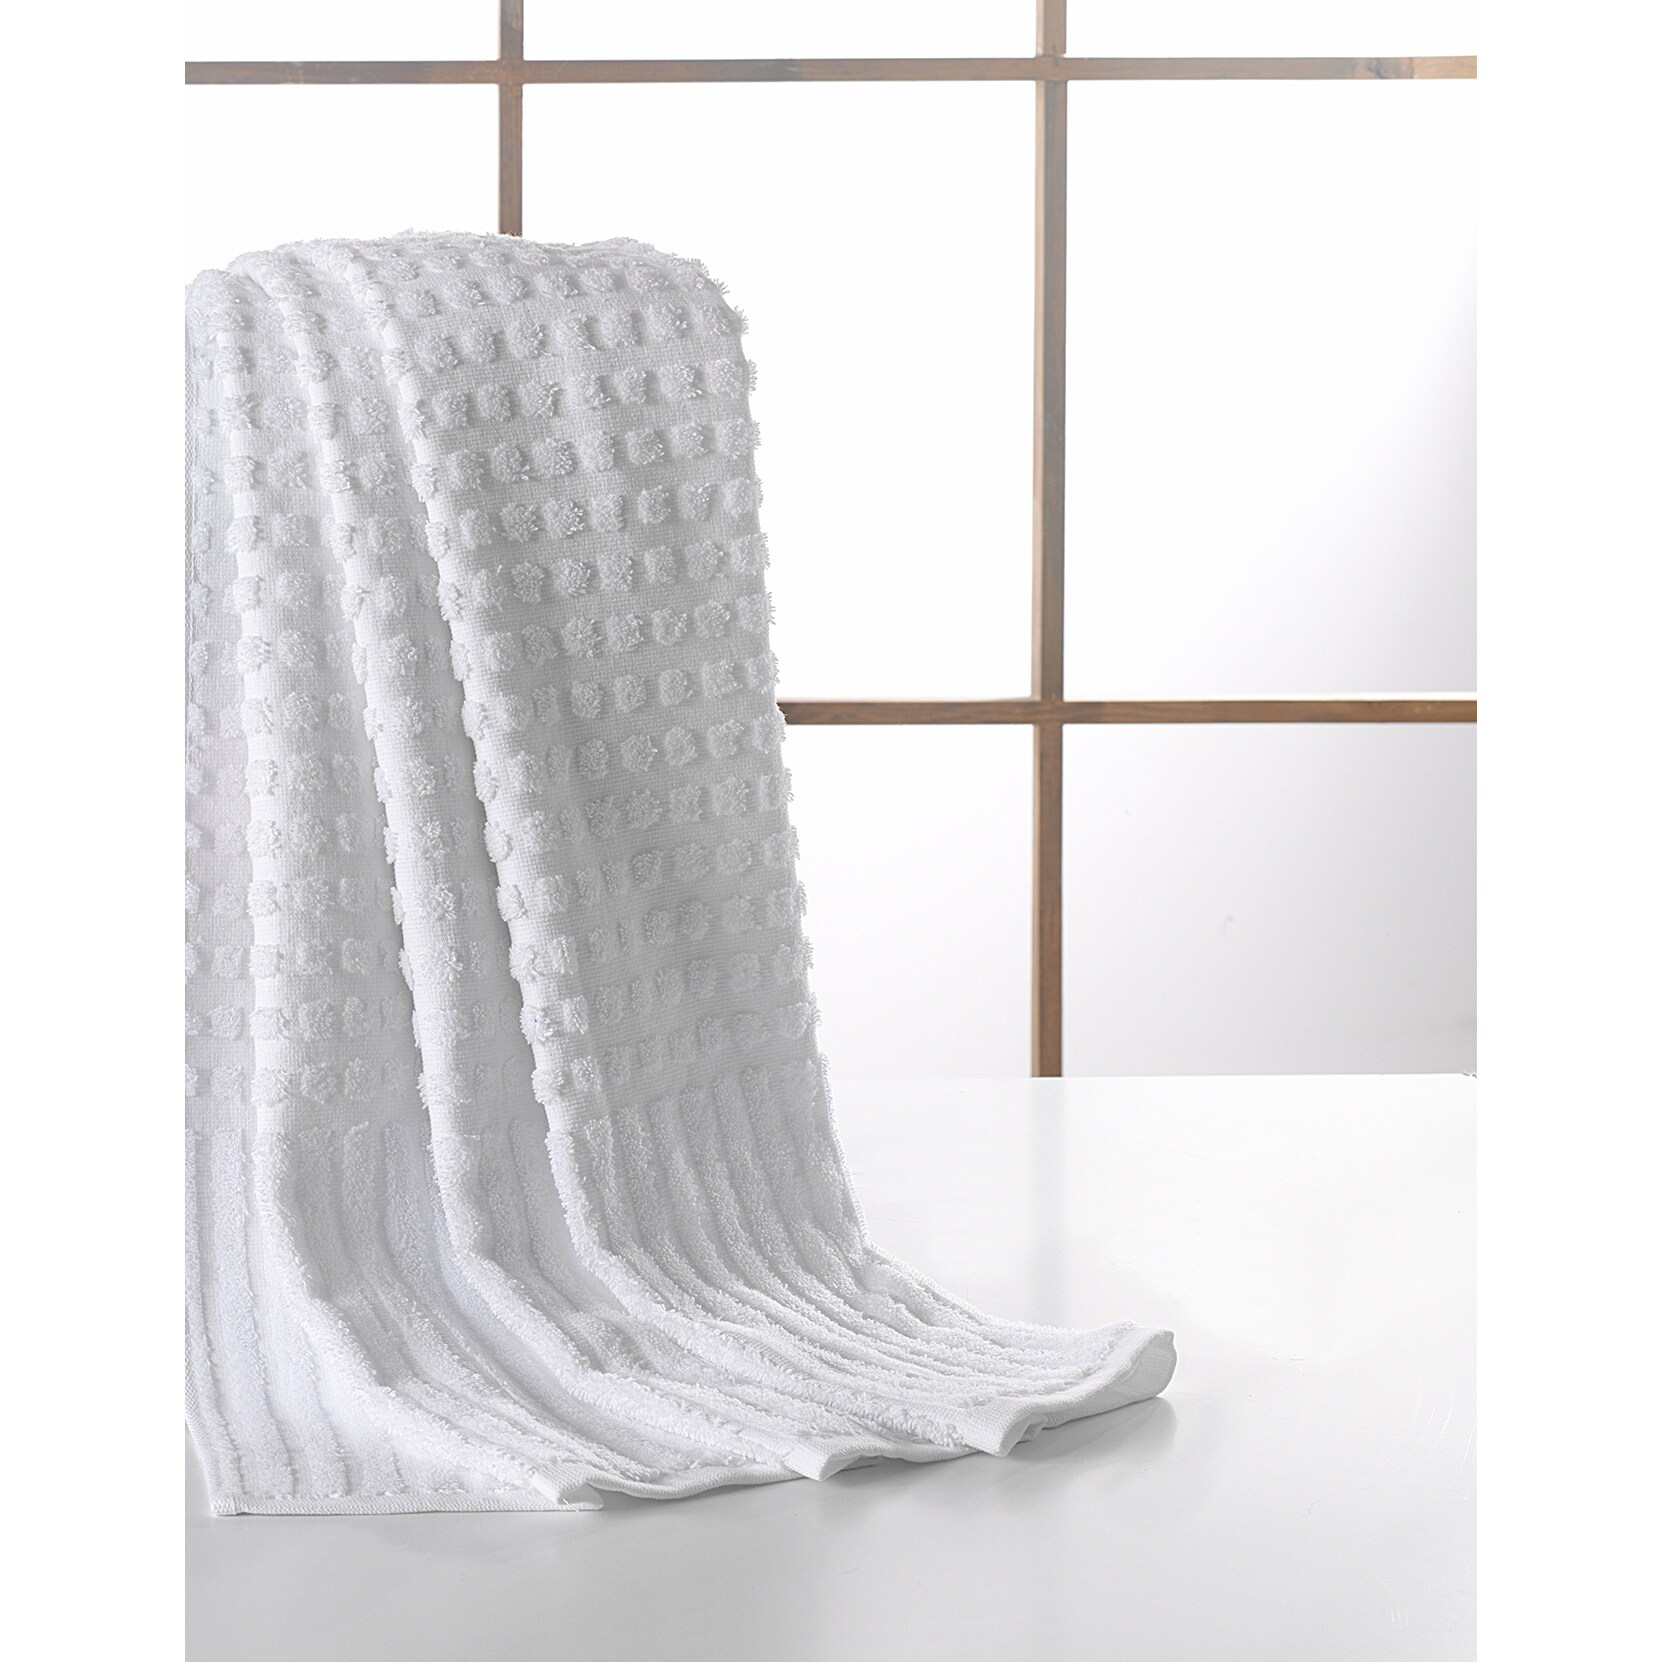 White Pack of 6 Large Bath Towels 100% Cotton 27x55 Highly Absorbent